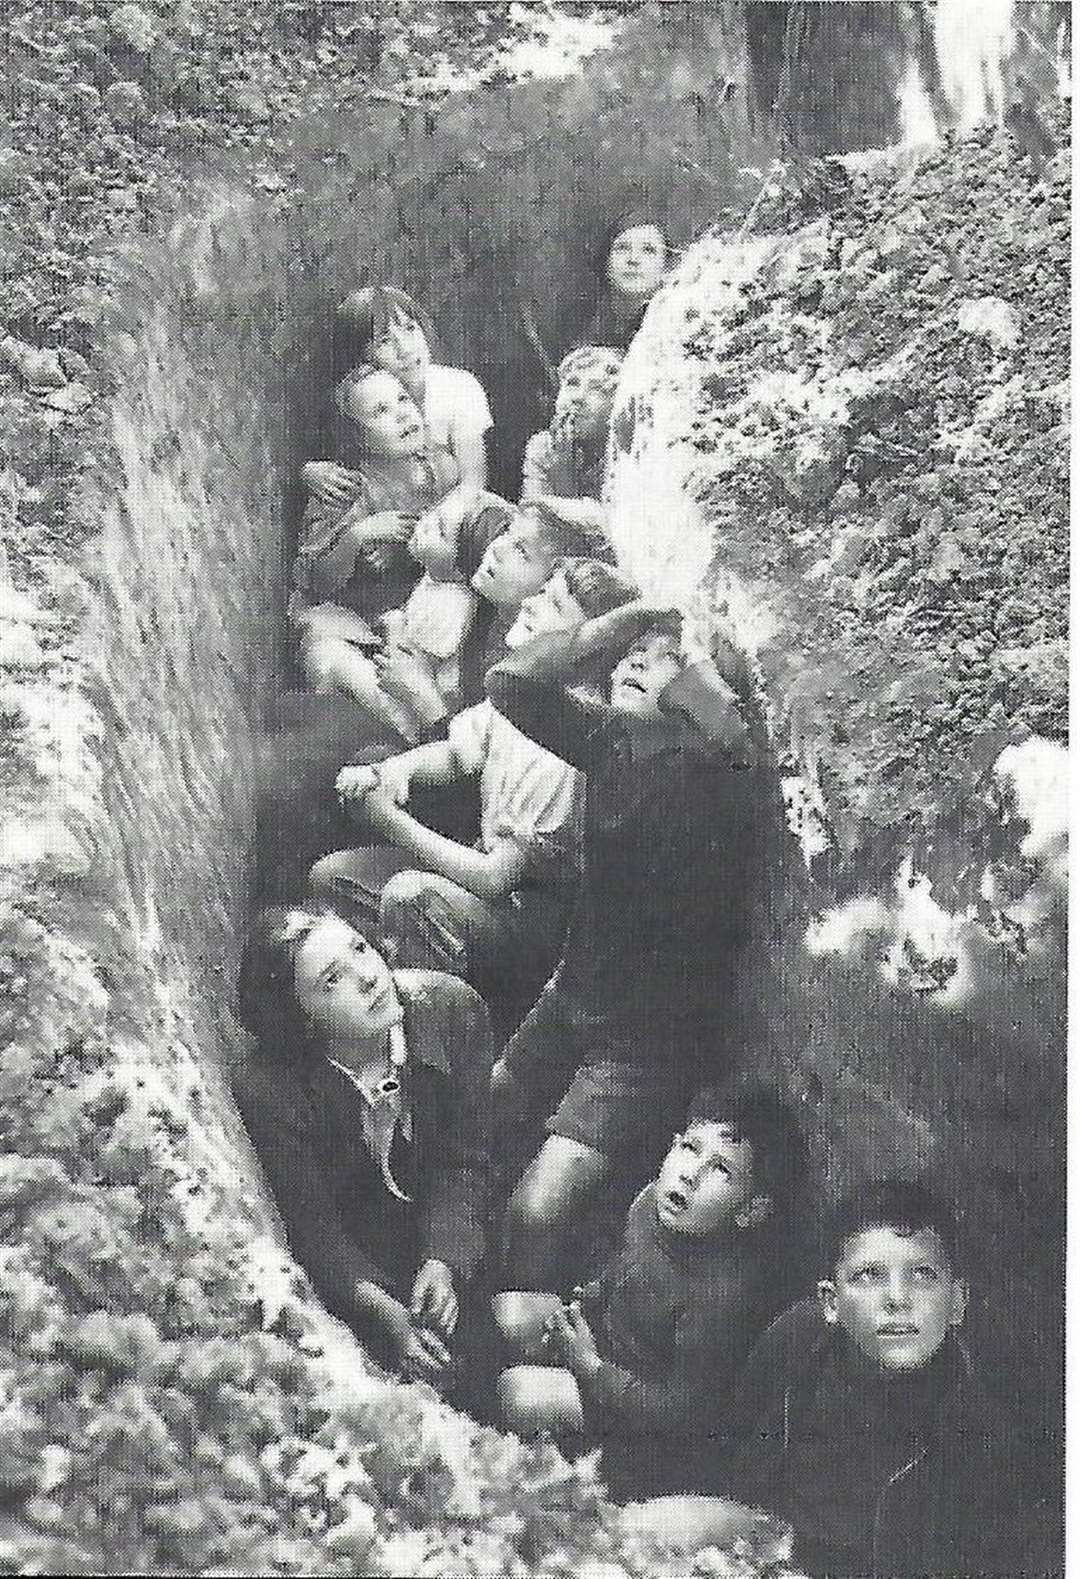 Children in Paddock Wood shelter in a trench as they watch a dogfight overhead in 1940